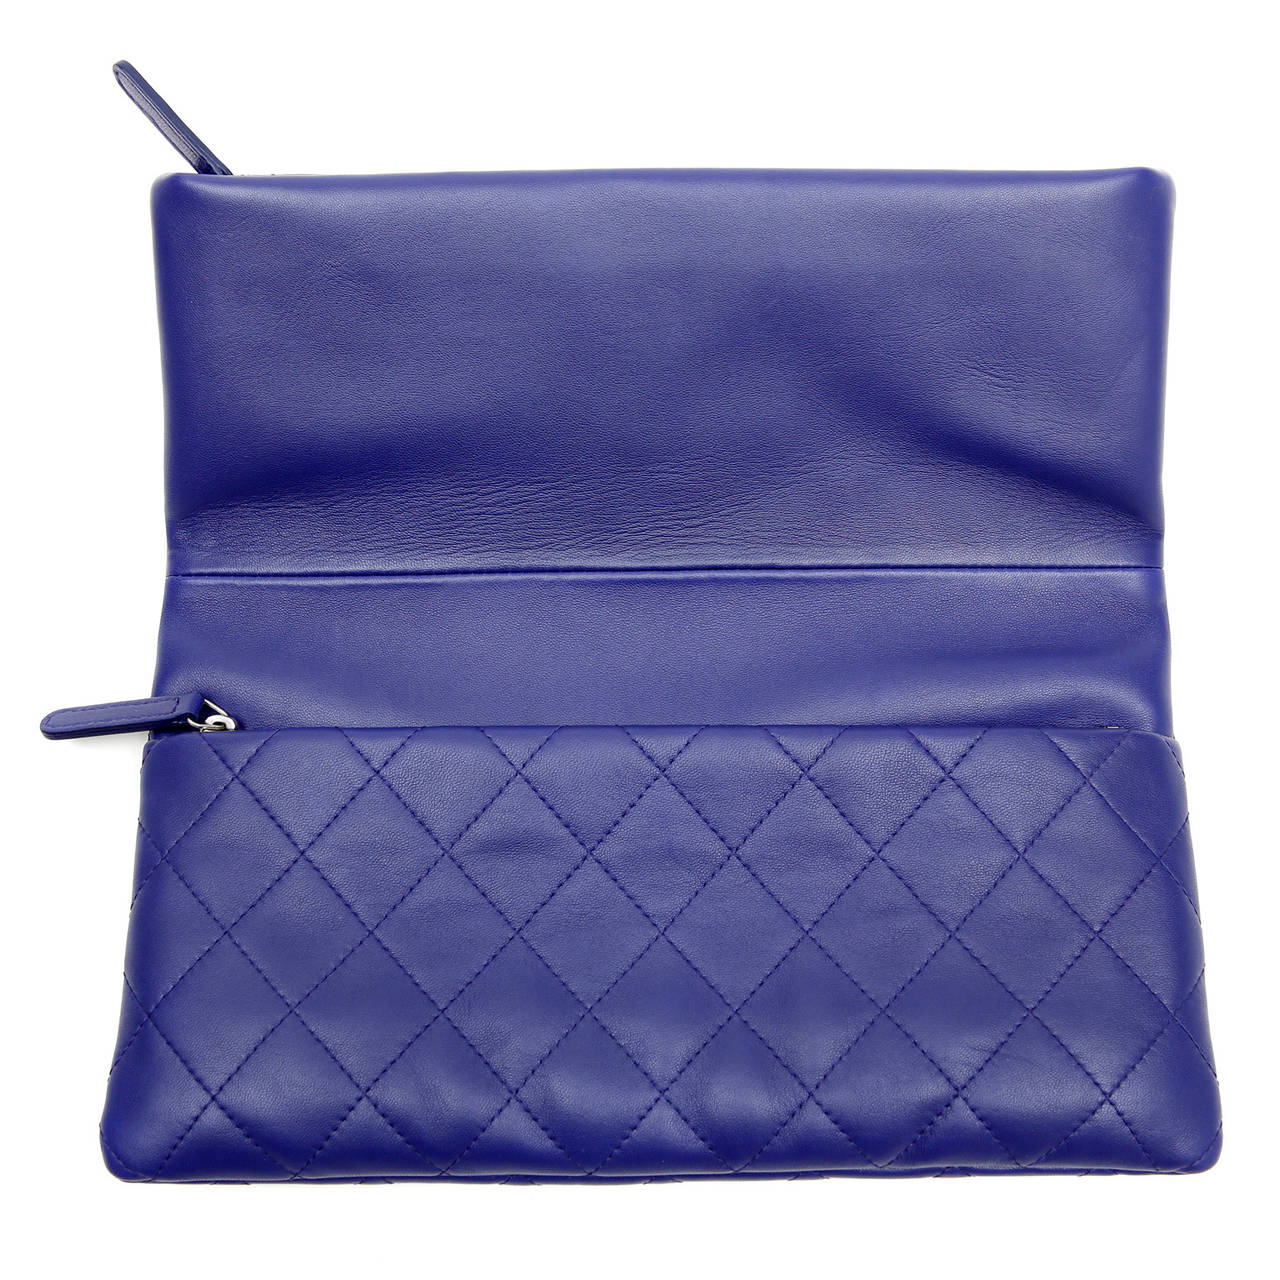 Chanel Purple Quilted Leather Clutch For Sale 2